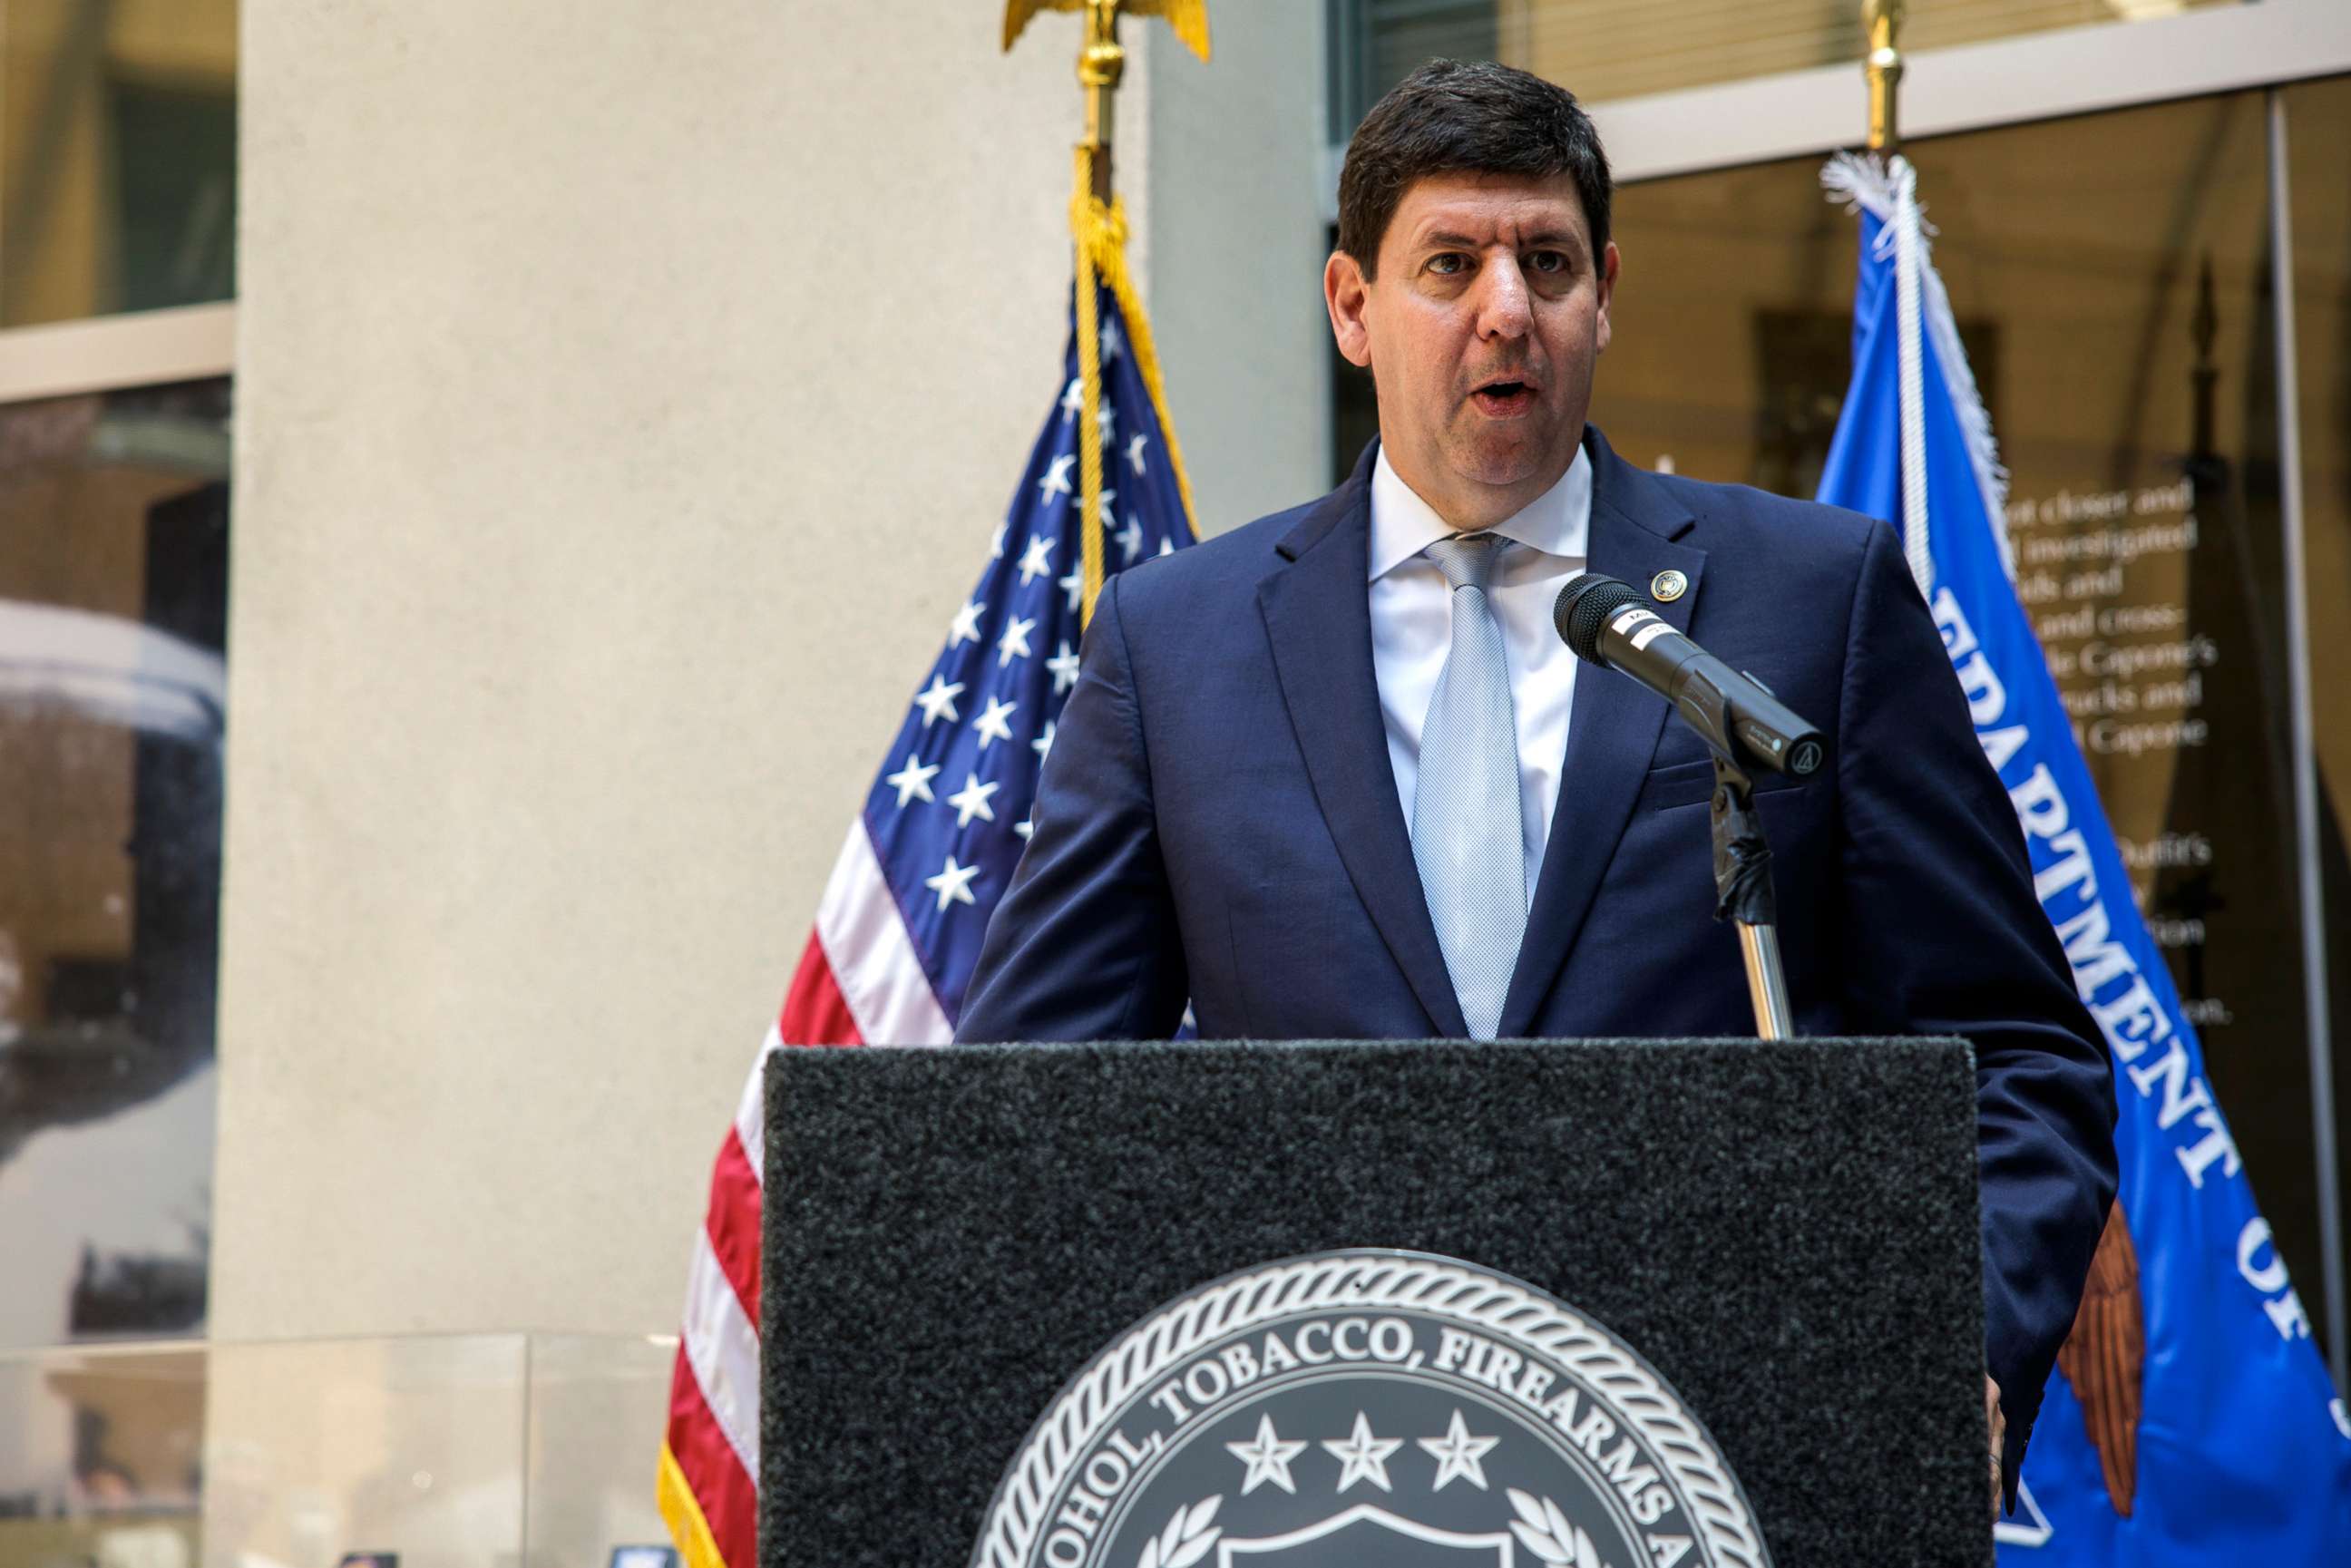 PHOTO: Steven Dettelbach speaks after being sworn in as the Director of The Bureau of Alcohol, Tobacco, Firearms, and Explosives (ATF) at the ATF headquarters, on July 19, 2022, in Washington, D.C.